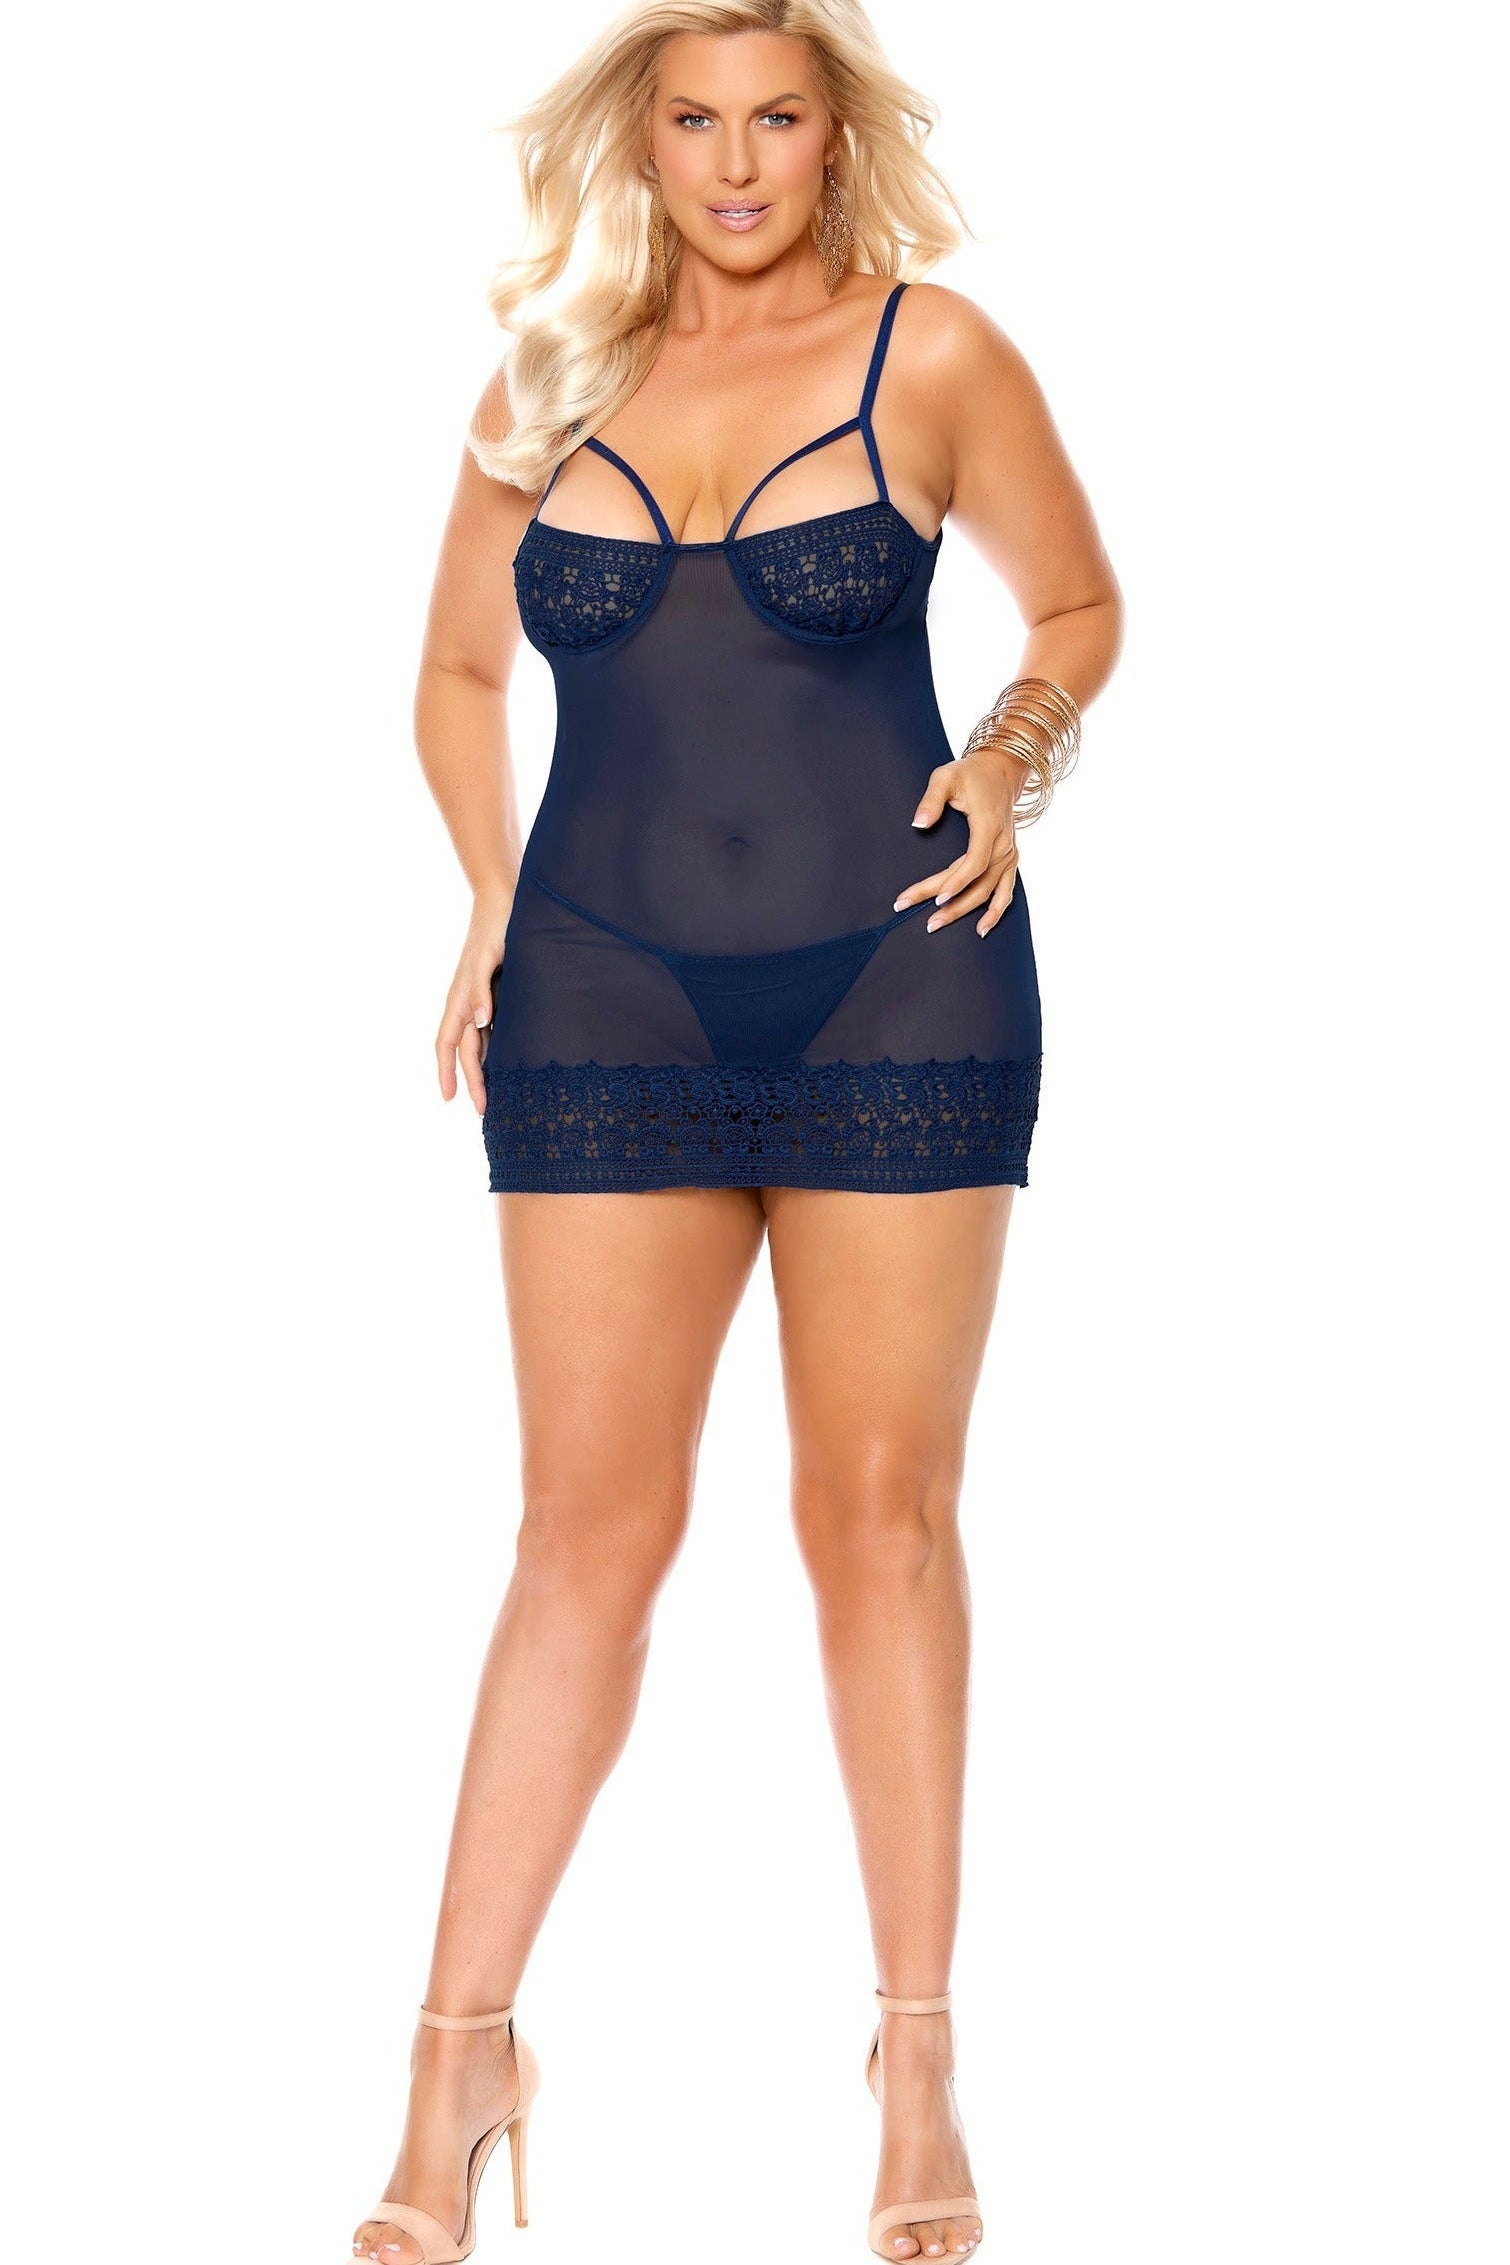 Plus Size Crochet Lace Babydoll With Underwire Demi Cups – Lady Occasions